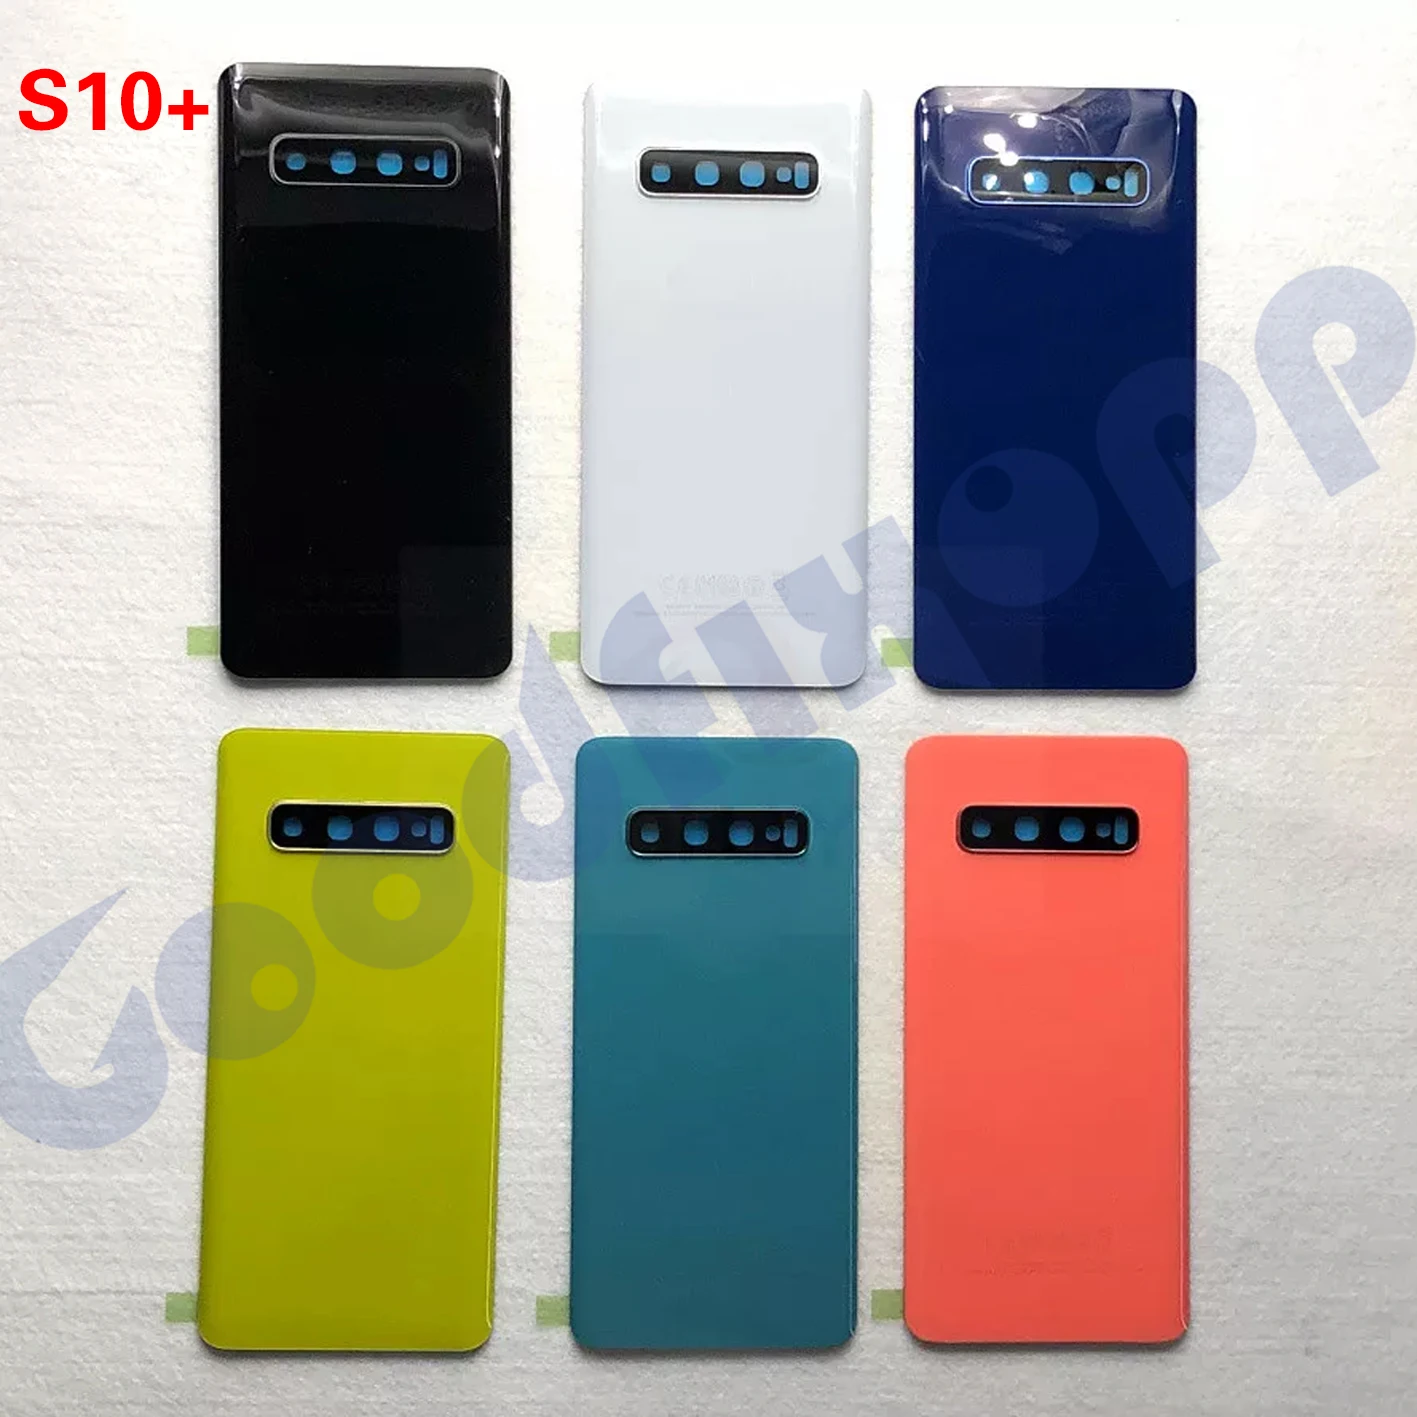 

For Samsung Galaxy S10+ SM-G975 G975 G975F G975U G975W G975U1 G9750 G975N G975X Back Battery Cover Door Housing Case Rear Cover